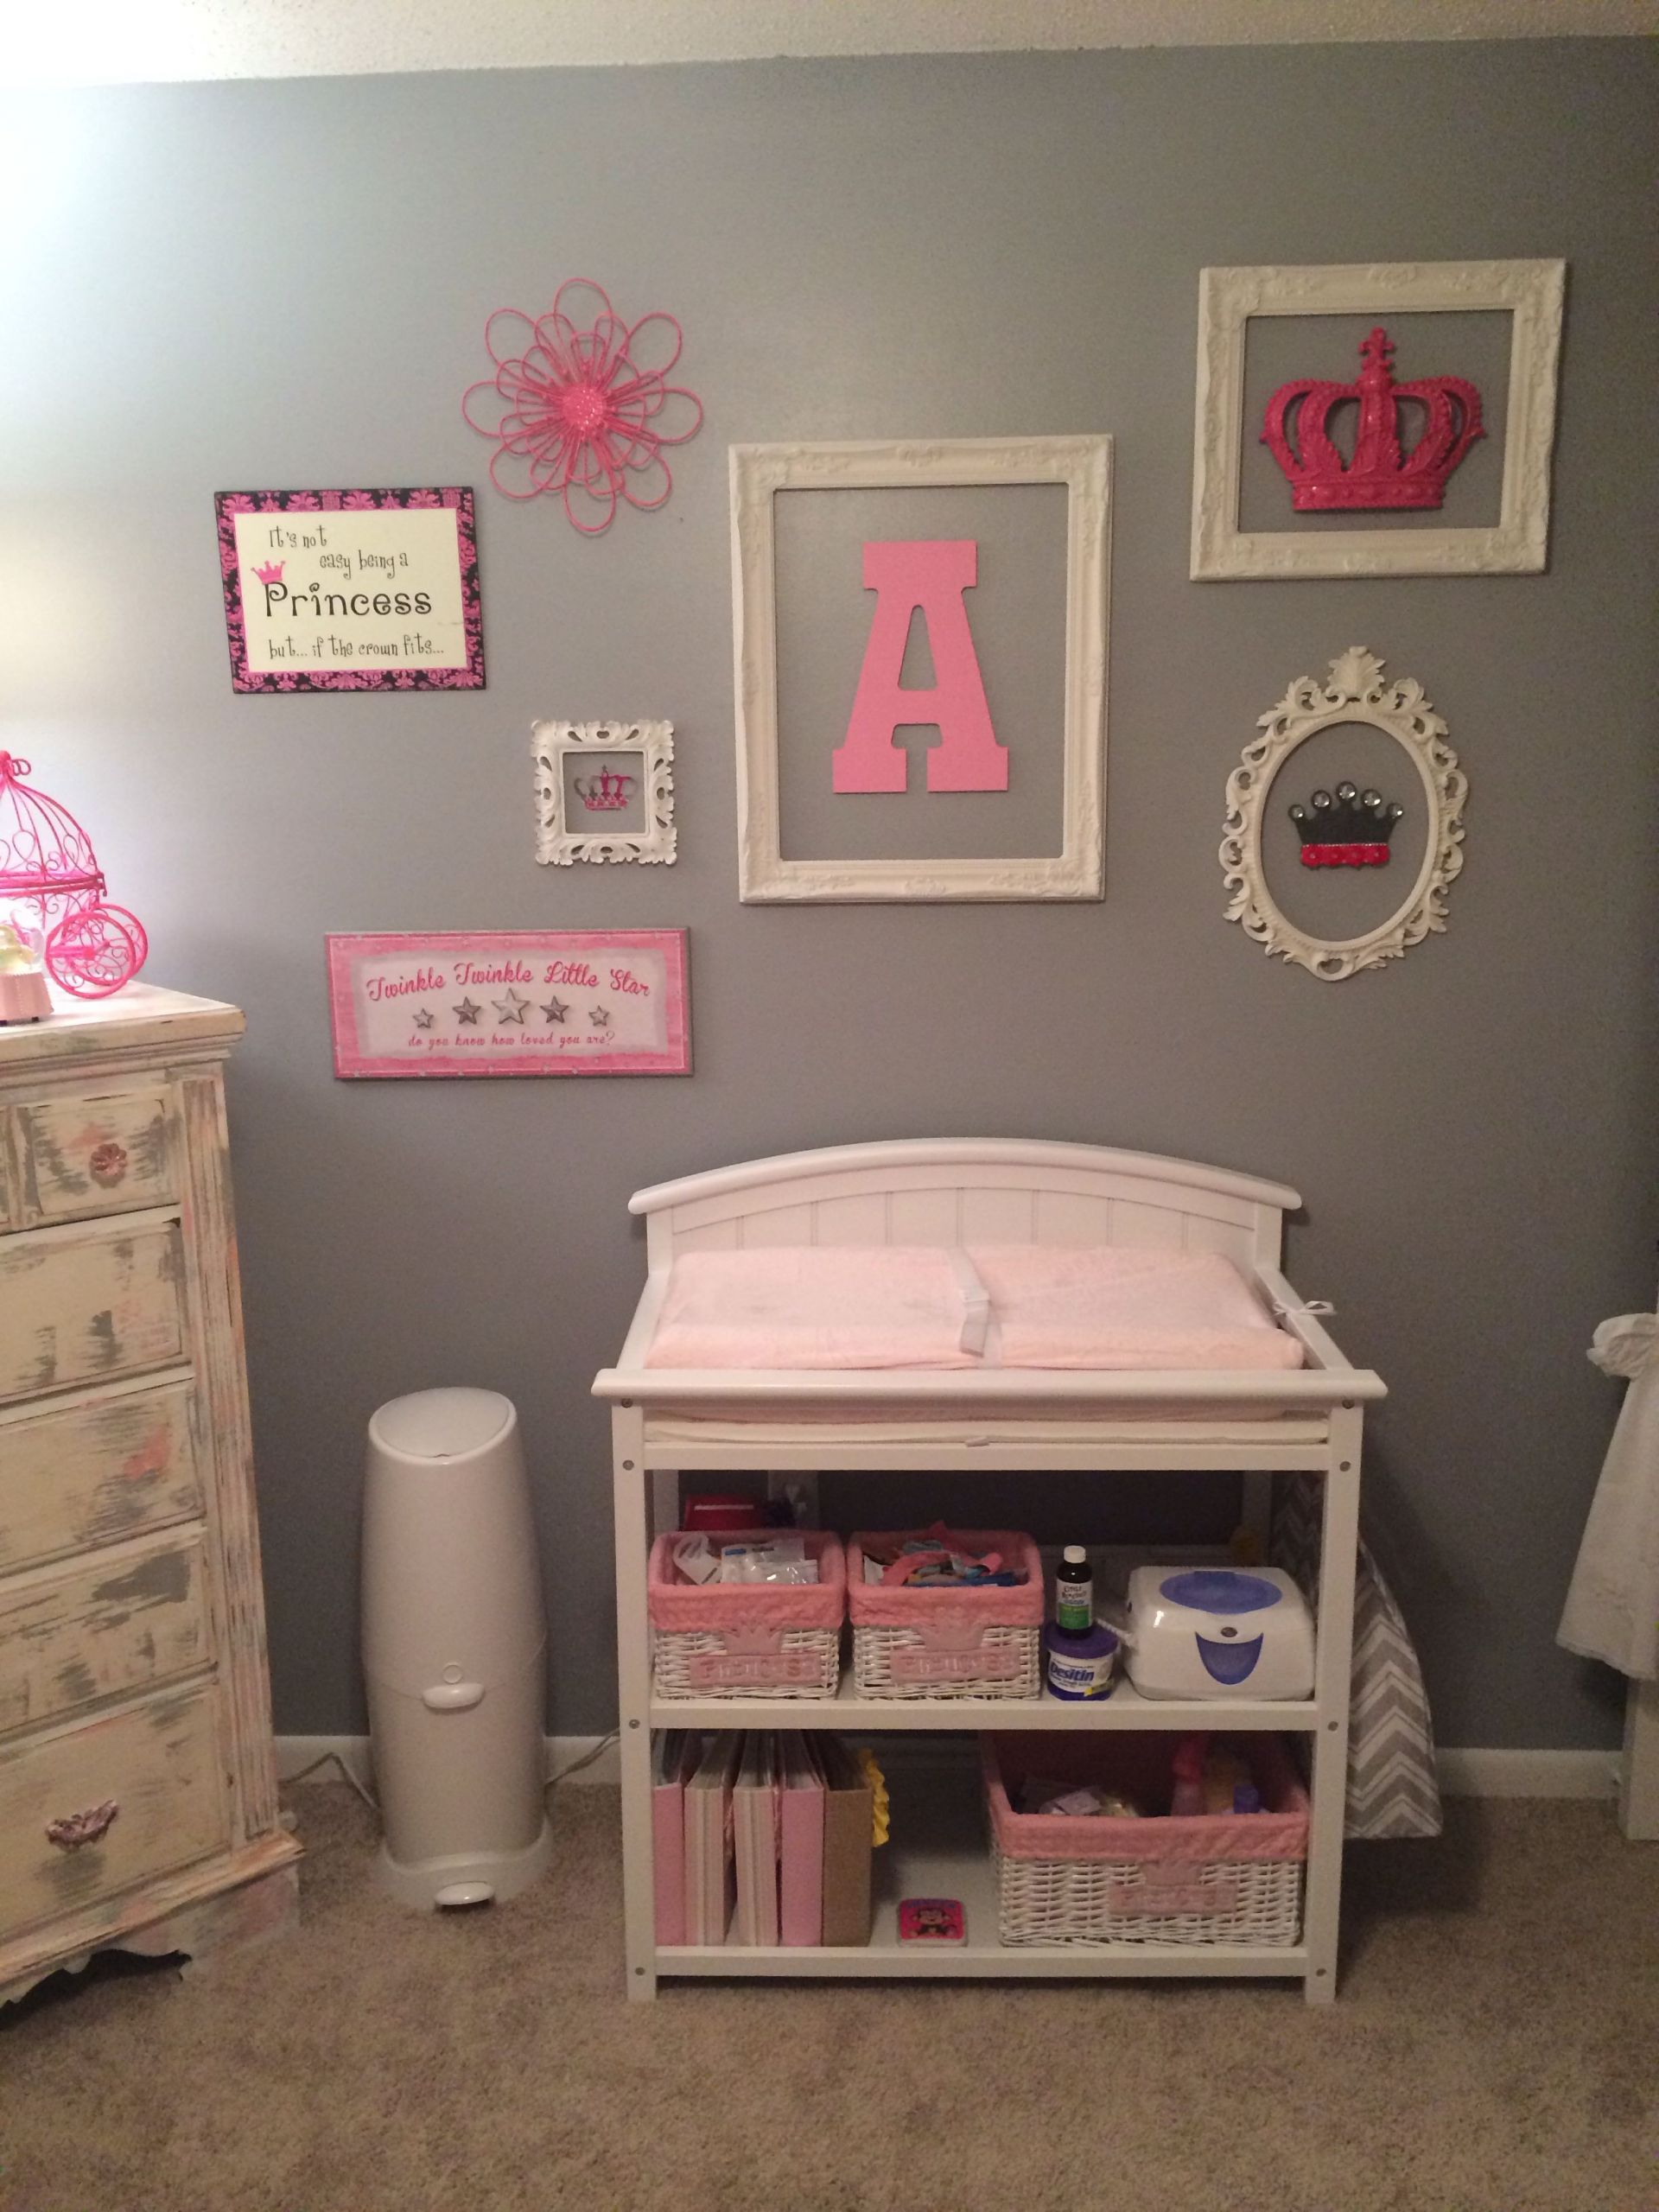 DIY Baby Girl Room Decorations
 Inexpensive and Easy To Do DIY Wall Décor